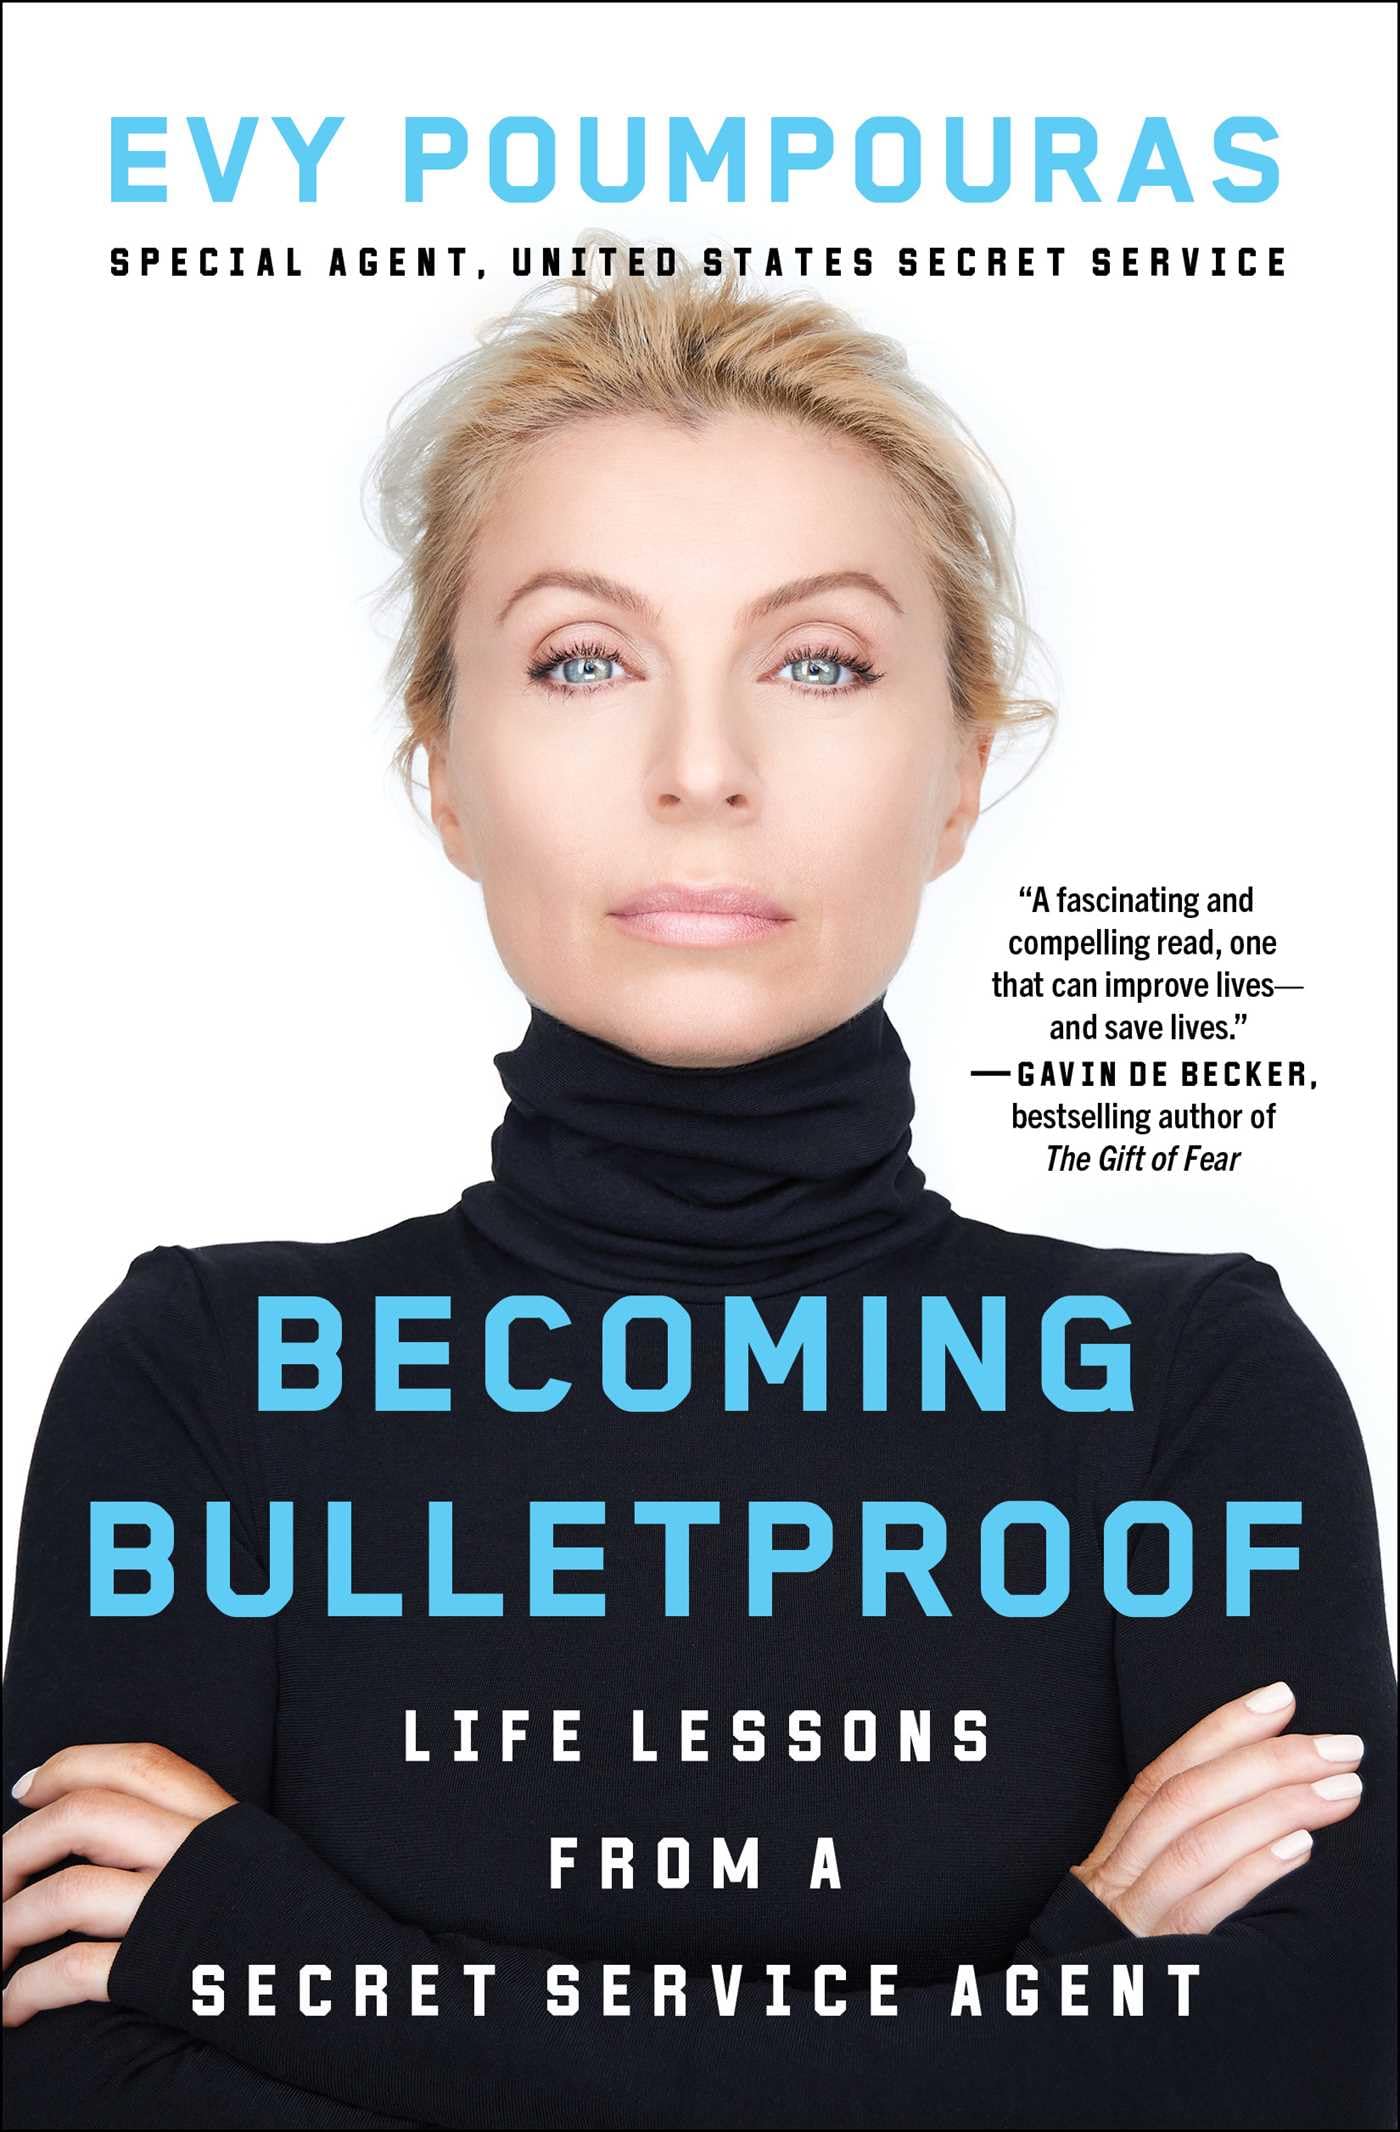 Becoming Bulletproof: Life Lessons from a Secret Service Agent by Poumpouras, Evy